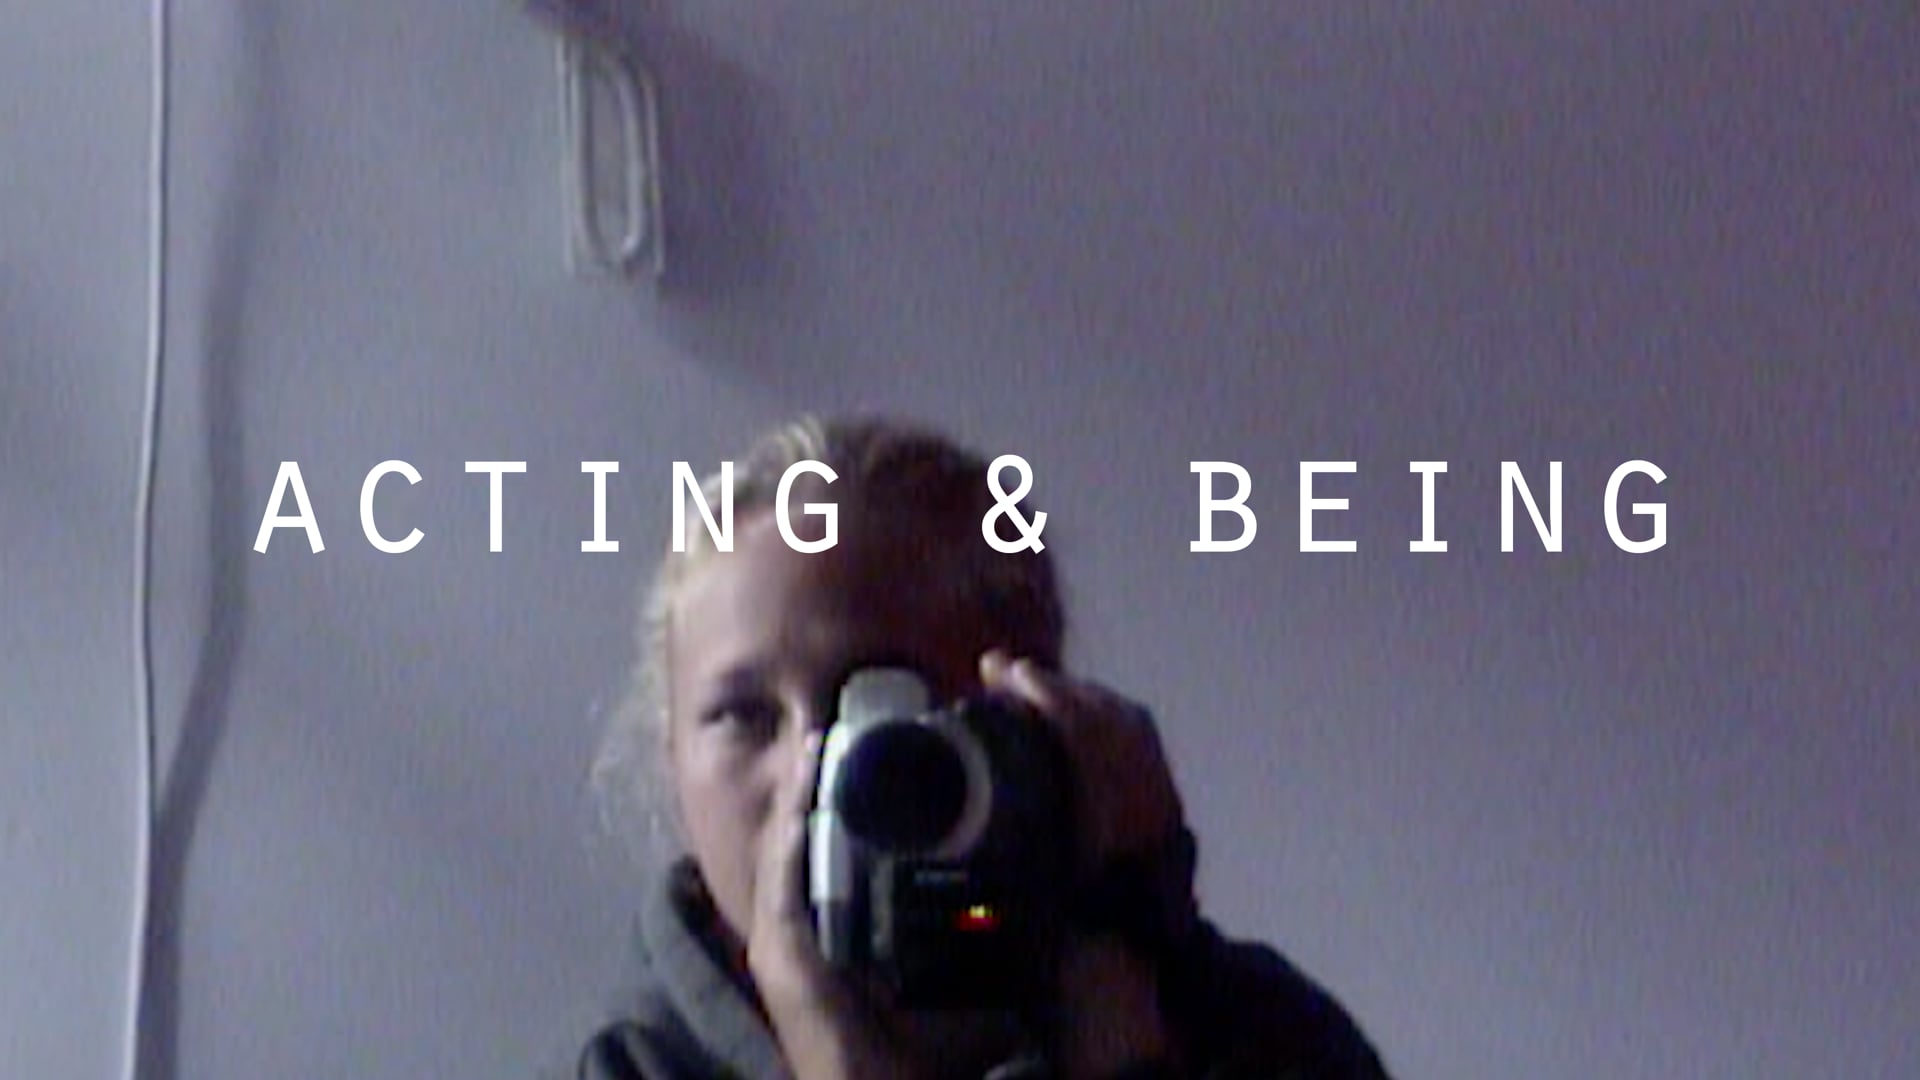 ACTING & BEING trailer